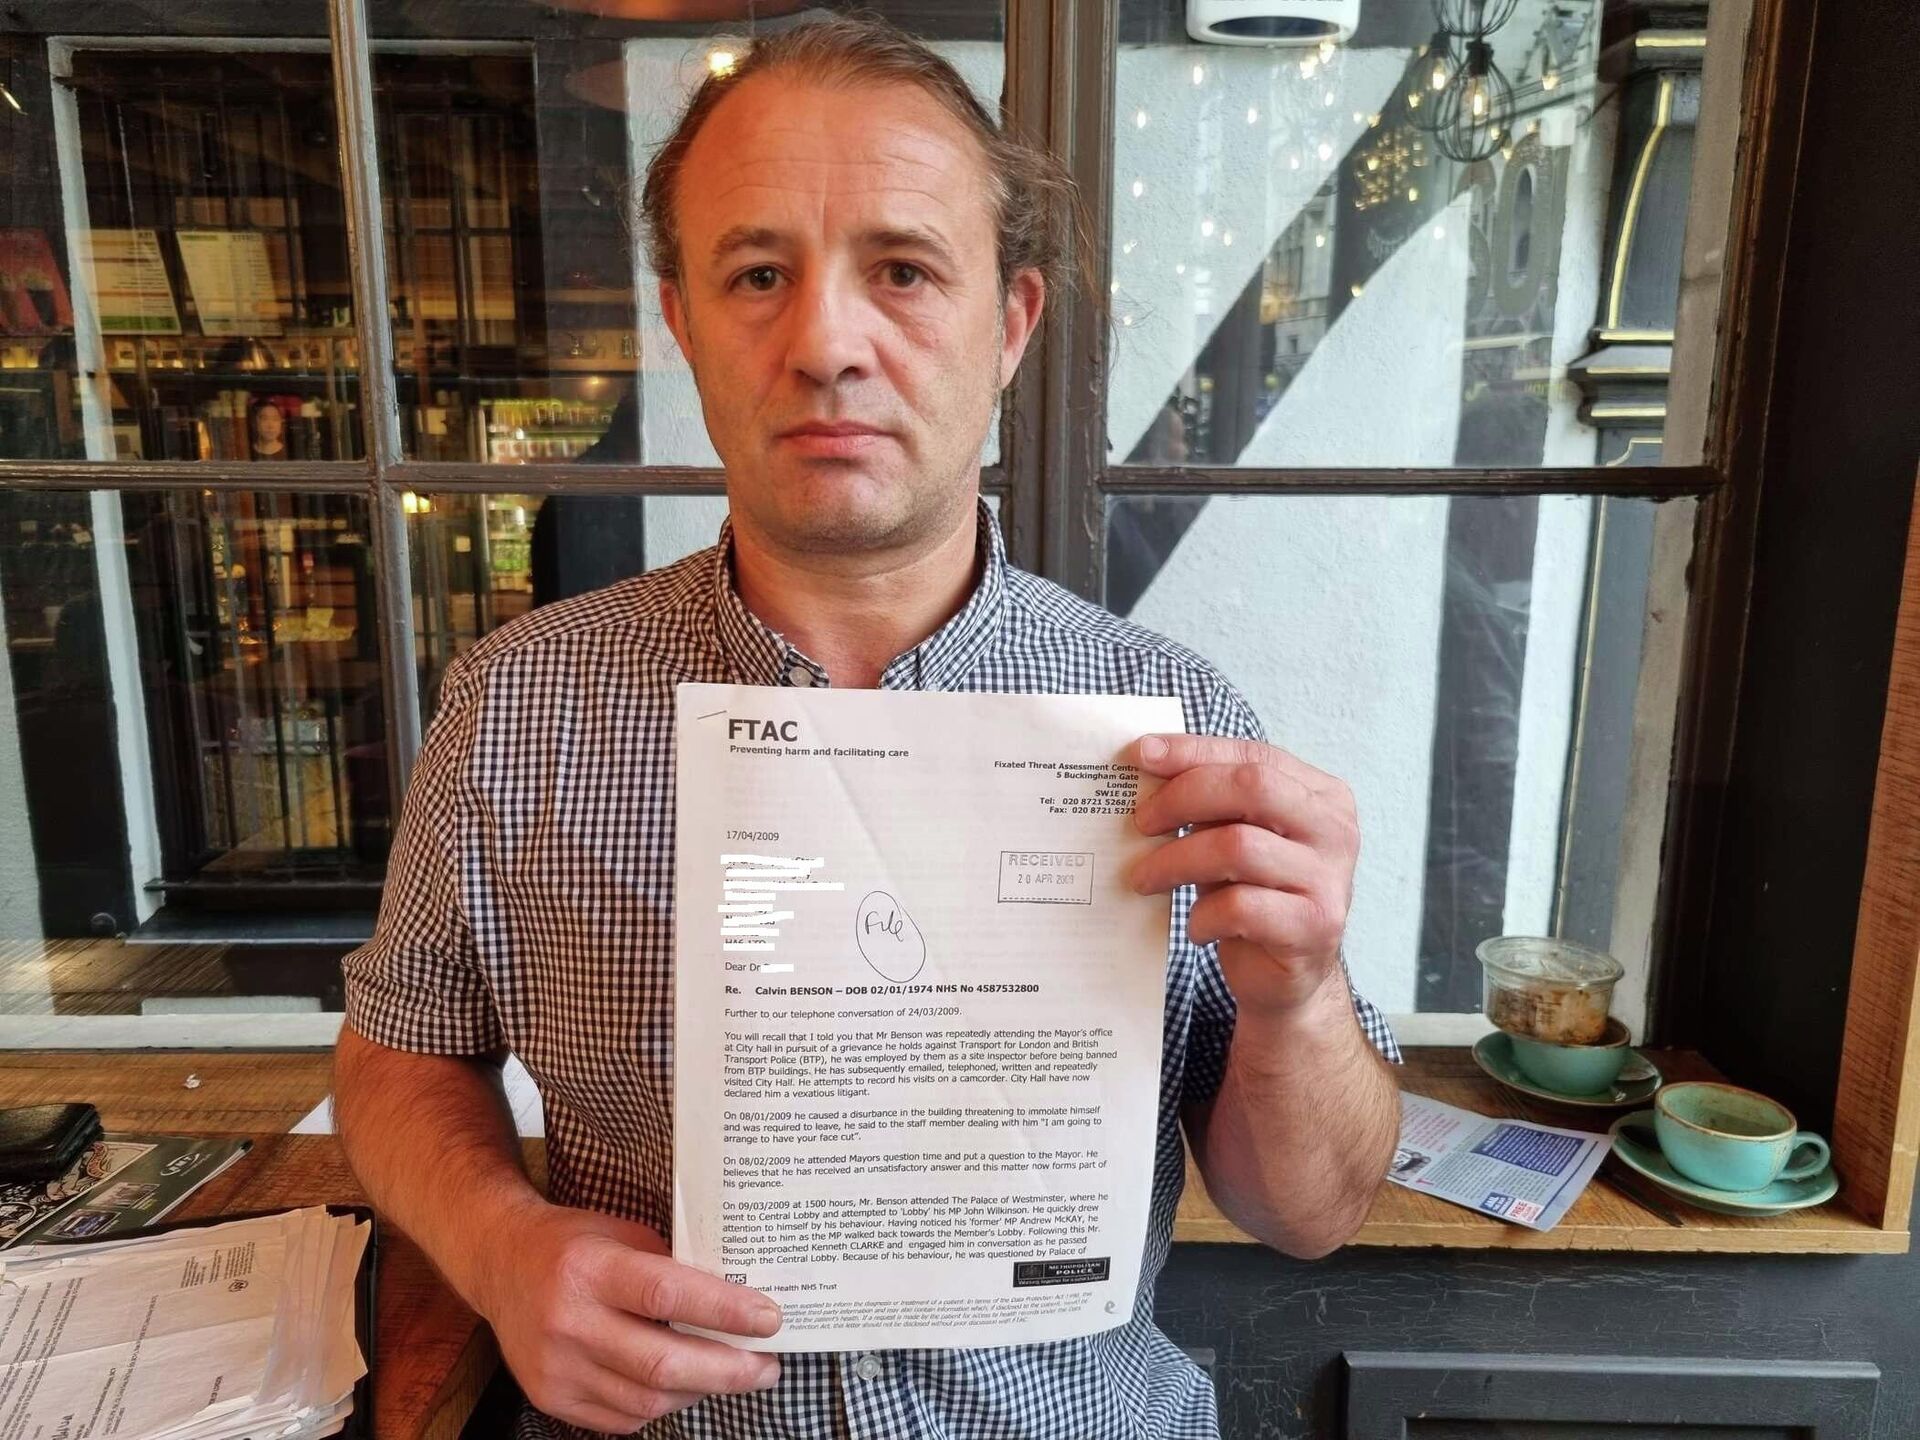 Calvin Benson with letter from FTAC to his GP - Sputnik International, 1920, 12.11.2021